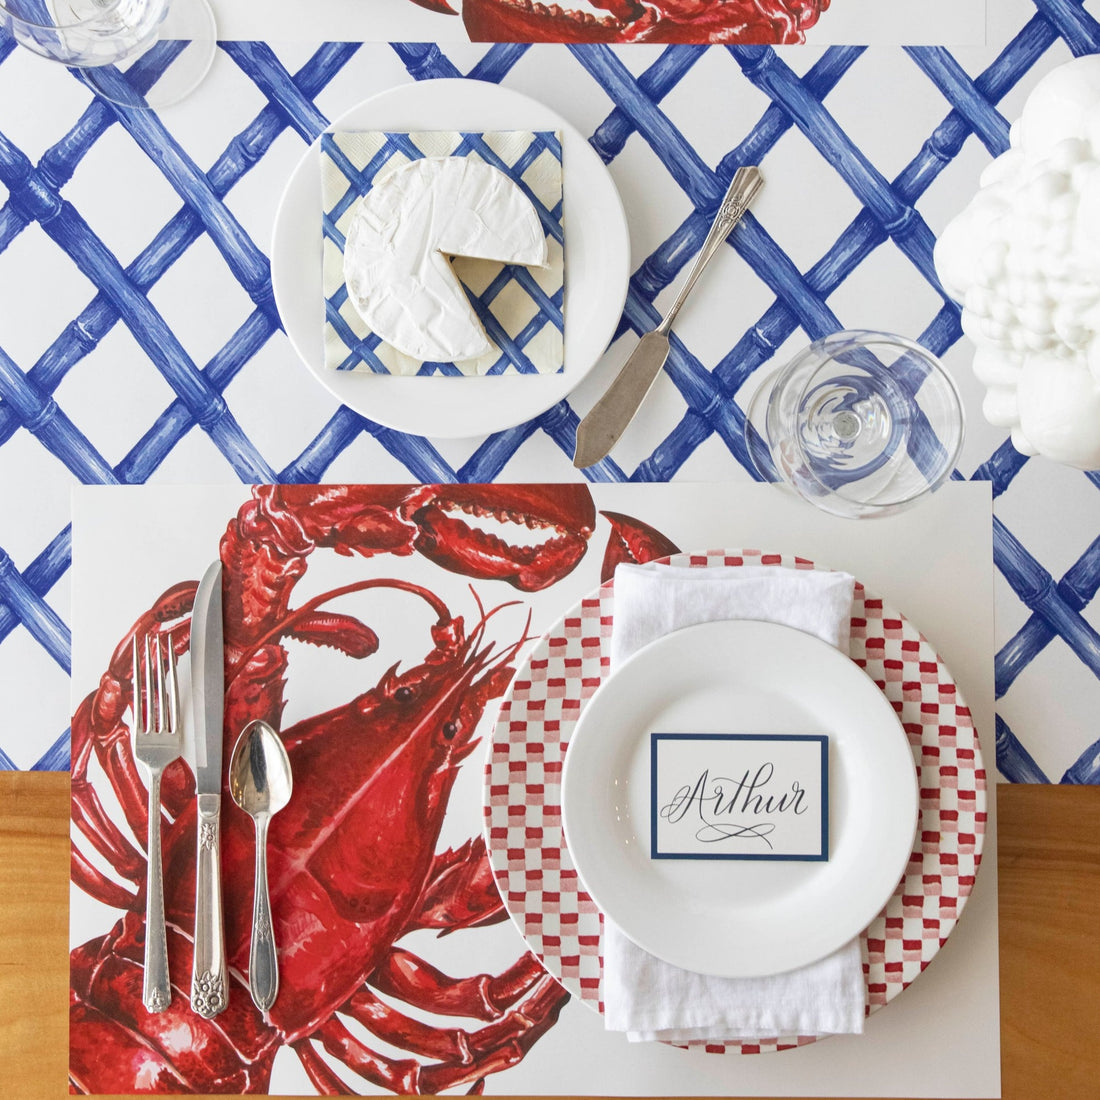 The Maine Lobster Placemat under a nautical themed place setting, from above.